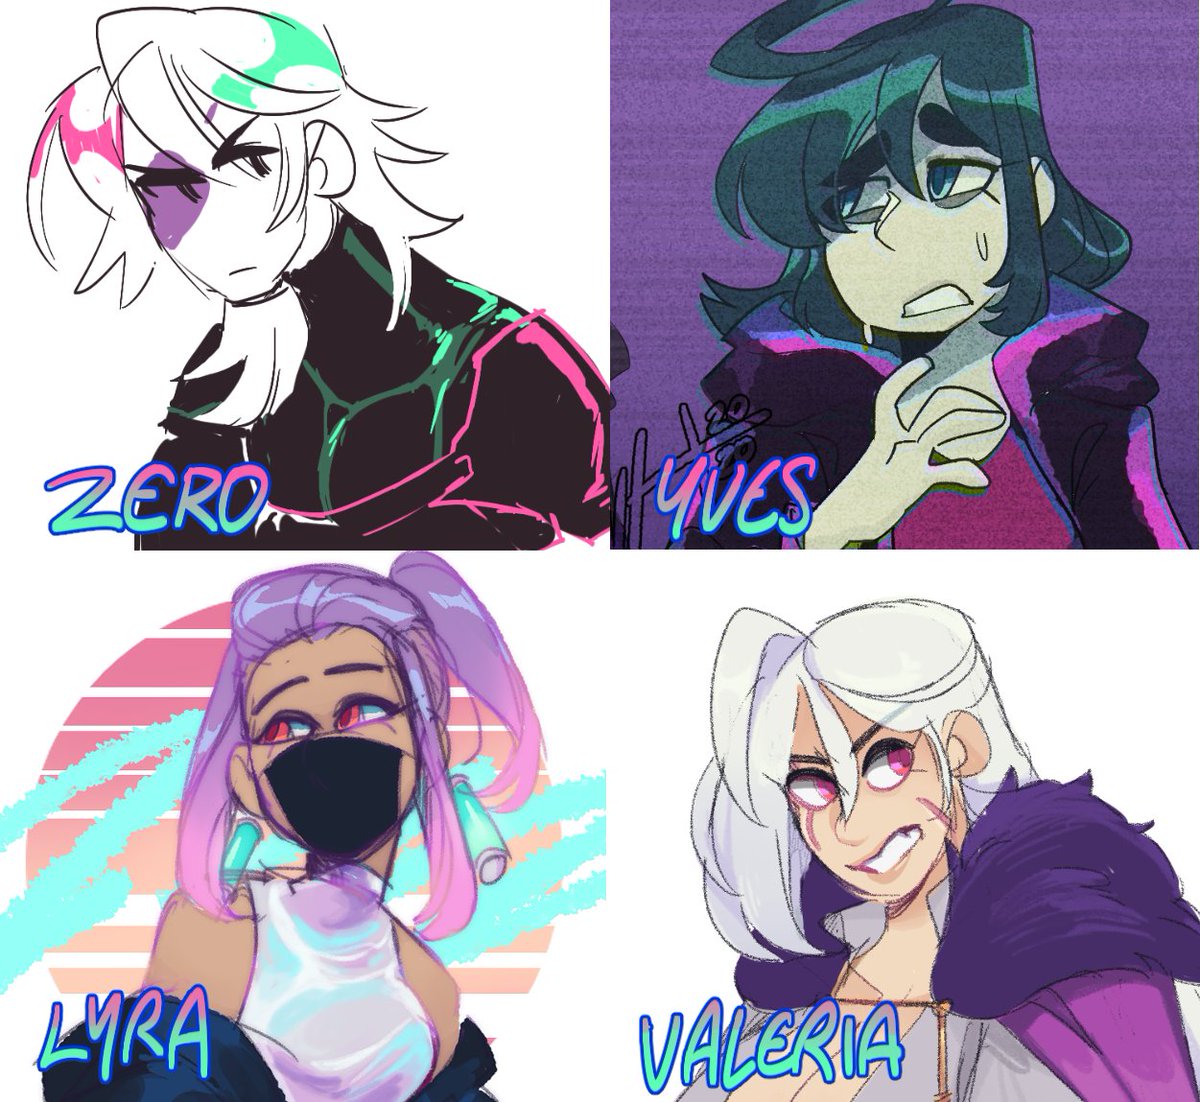 if i did the six outfits thing which oc should i do lmao i cant pick
(poll below)
(valeria's in a fantasy universe wheras the other three are from the same story fyi) 